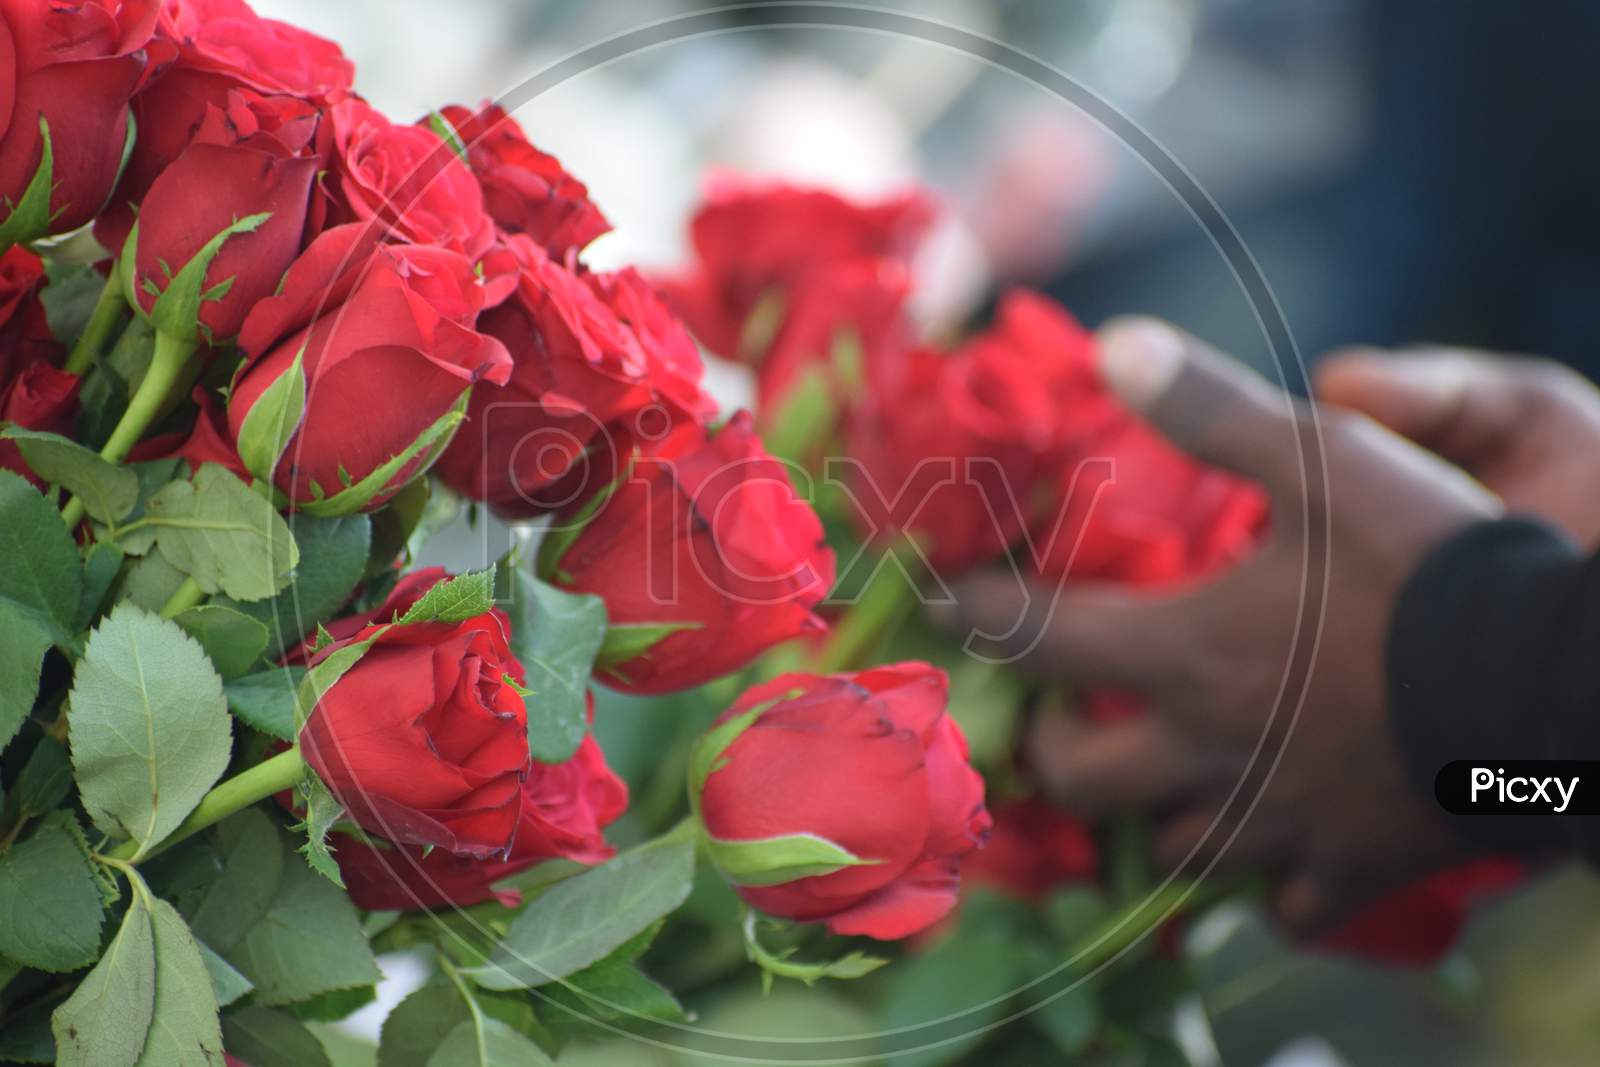 Fresh red roses in the flower market in Delhi India during morning time